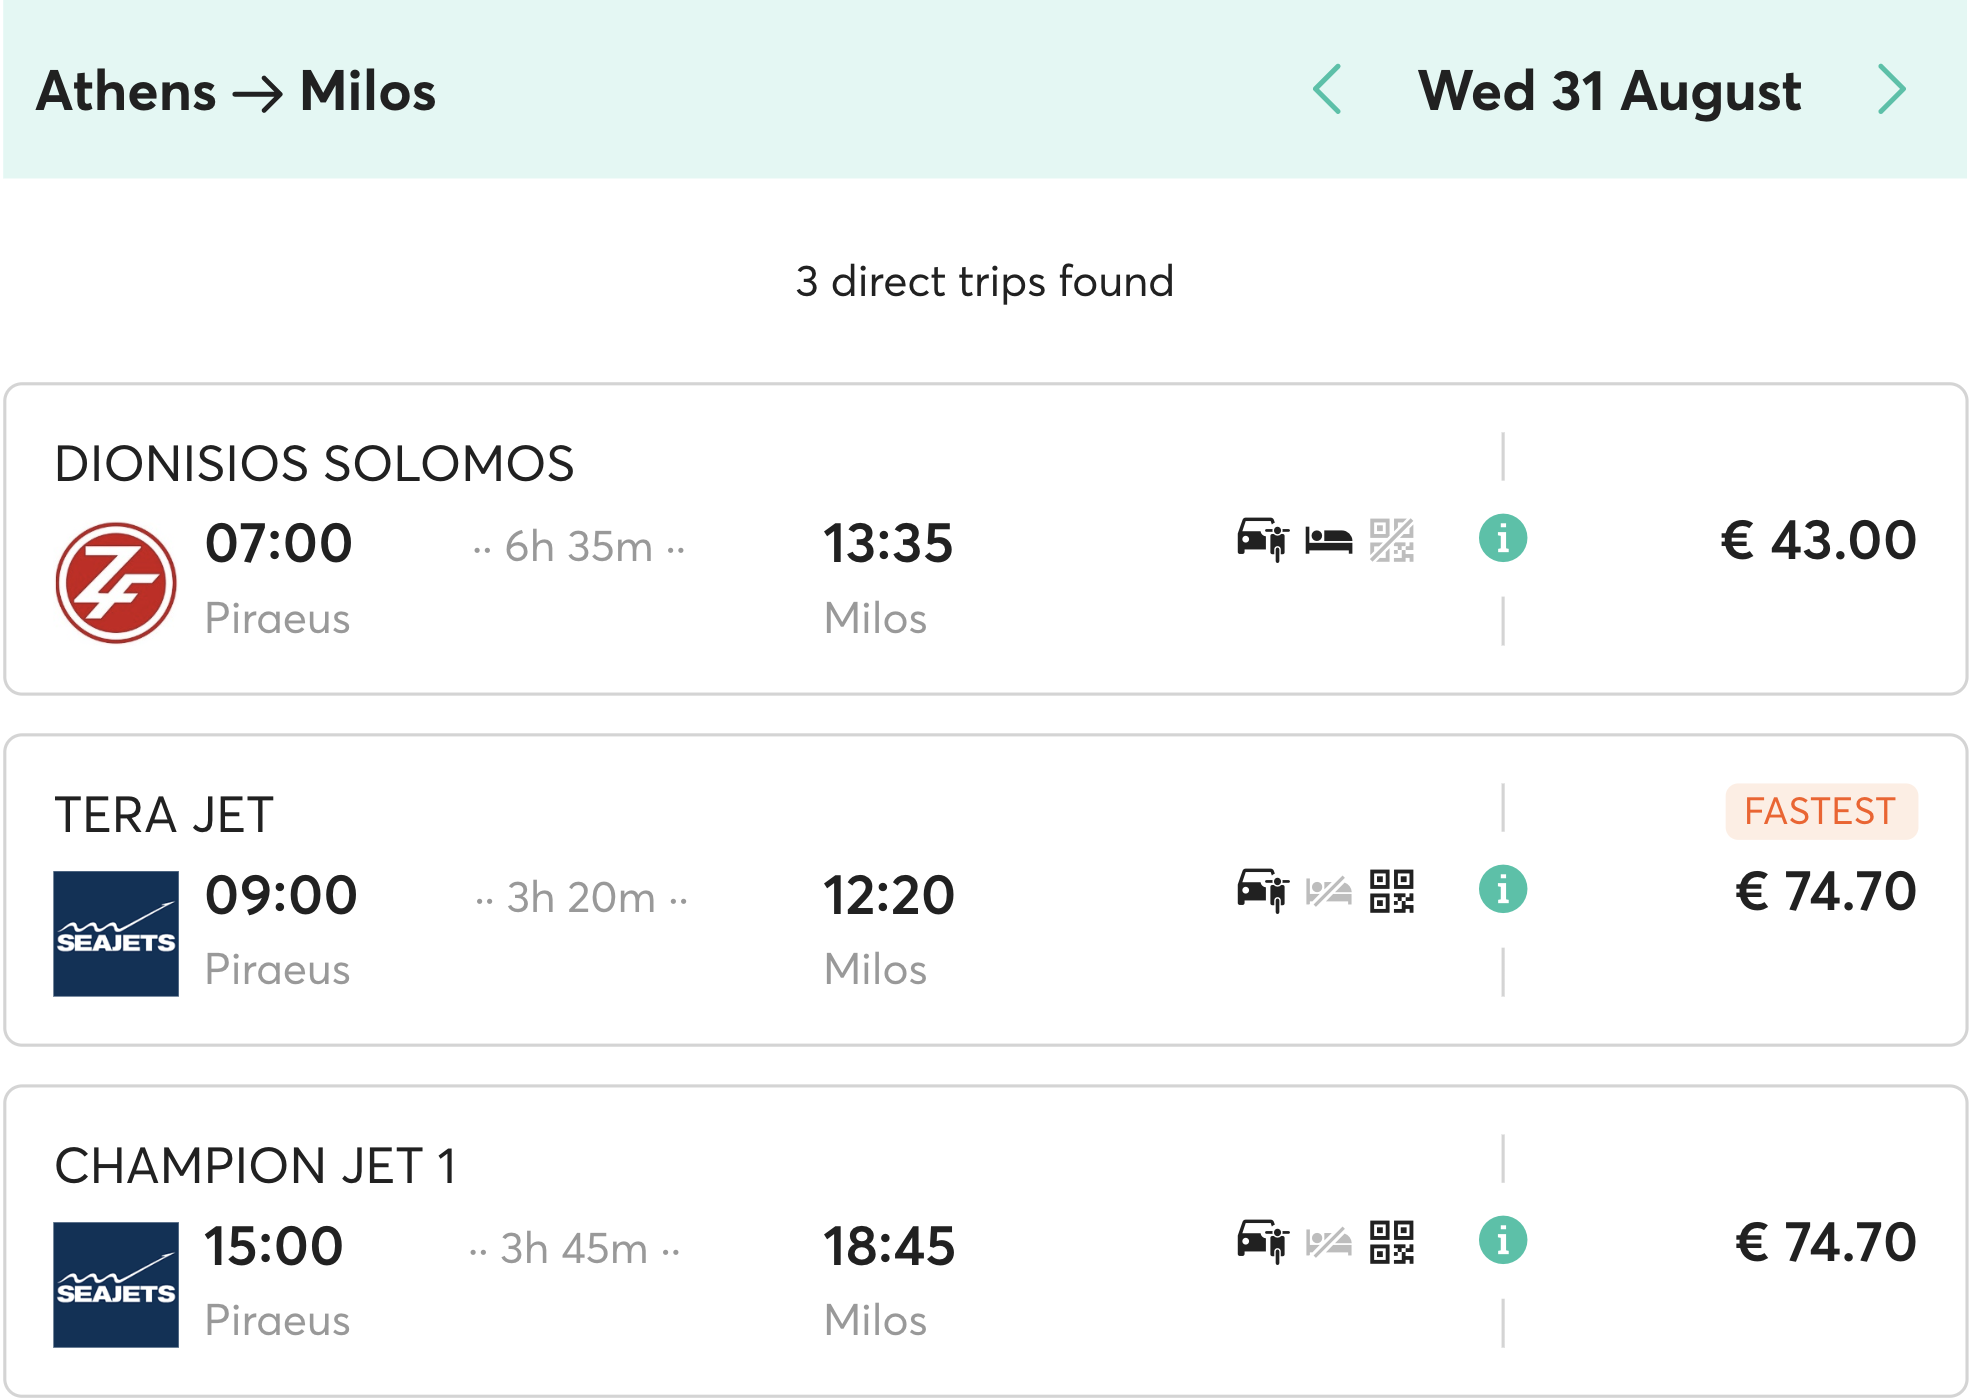 Ferry prices and schedule for Athens to Milos.